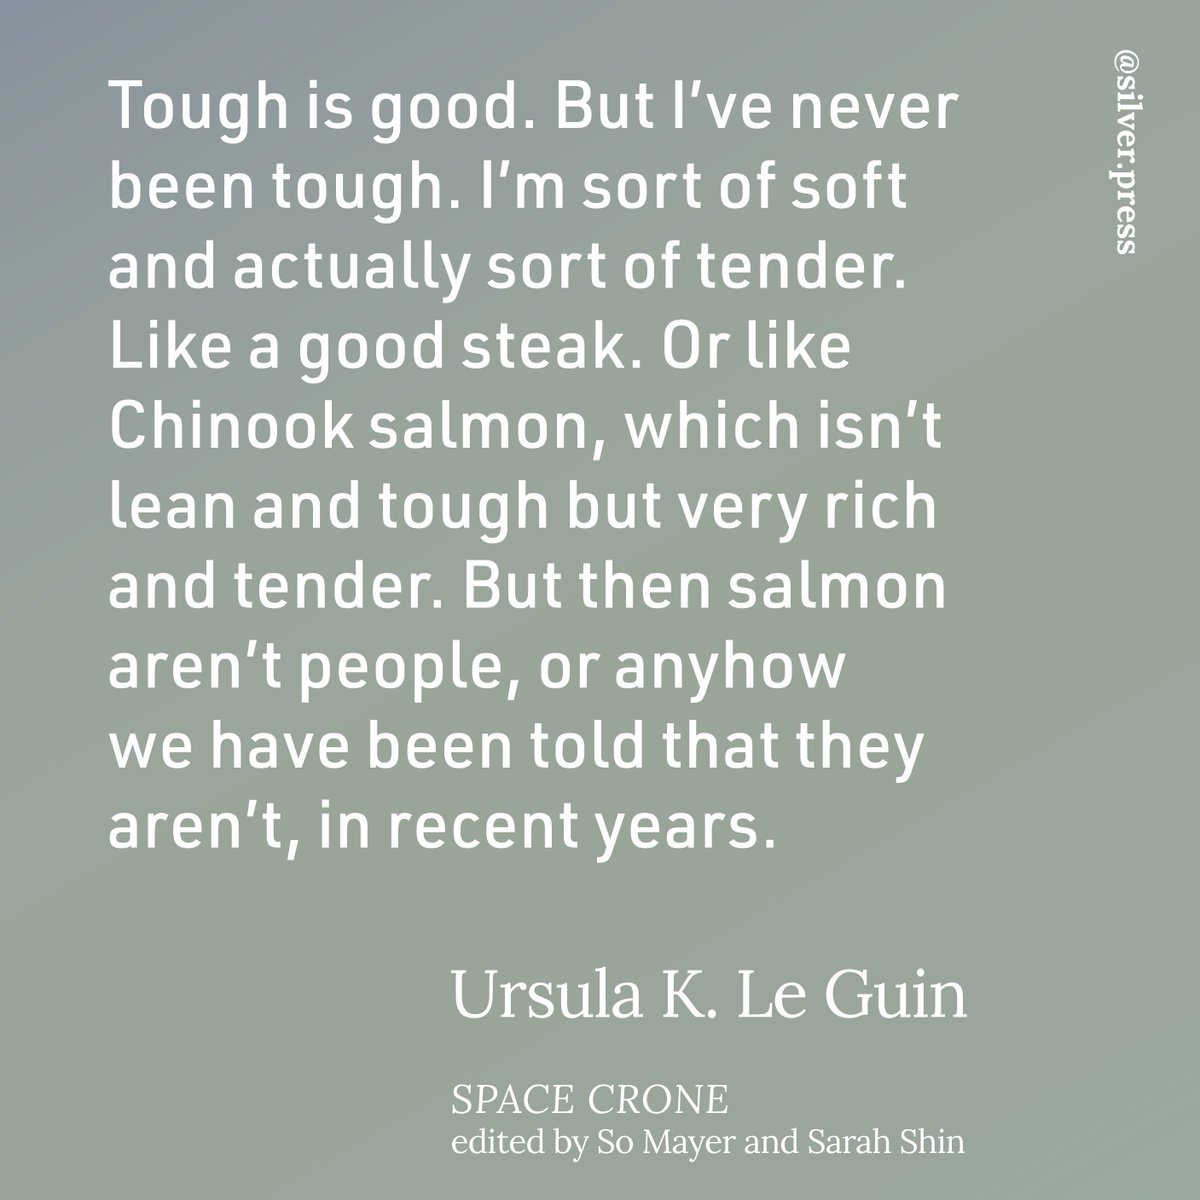 Insight into @ursulakleguin's multi-species feminist consciousness 🐟

From SPACE CRONE by Ursula K. Le Guin, edited by @Such_Mayer and Sarah Shin silverpress.org/collections/al…